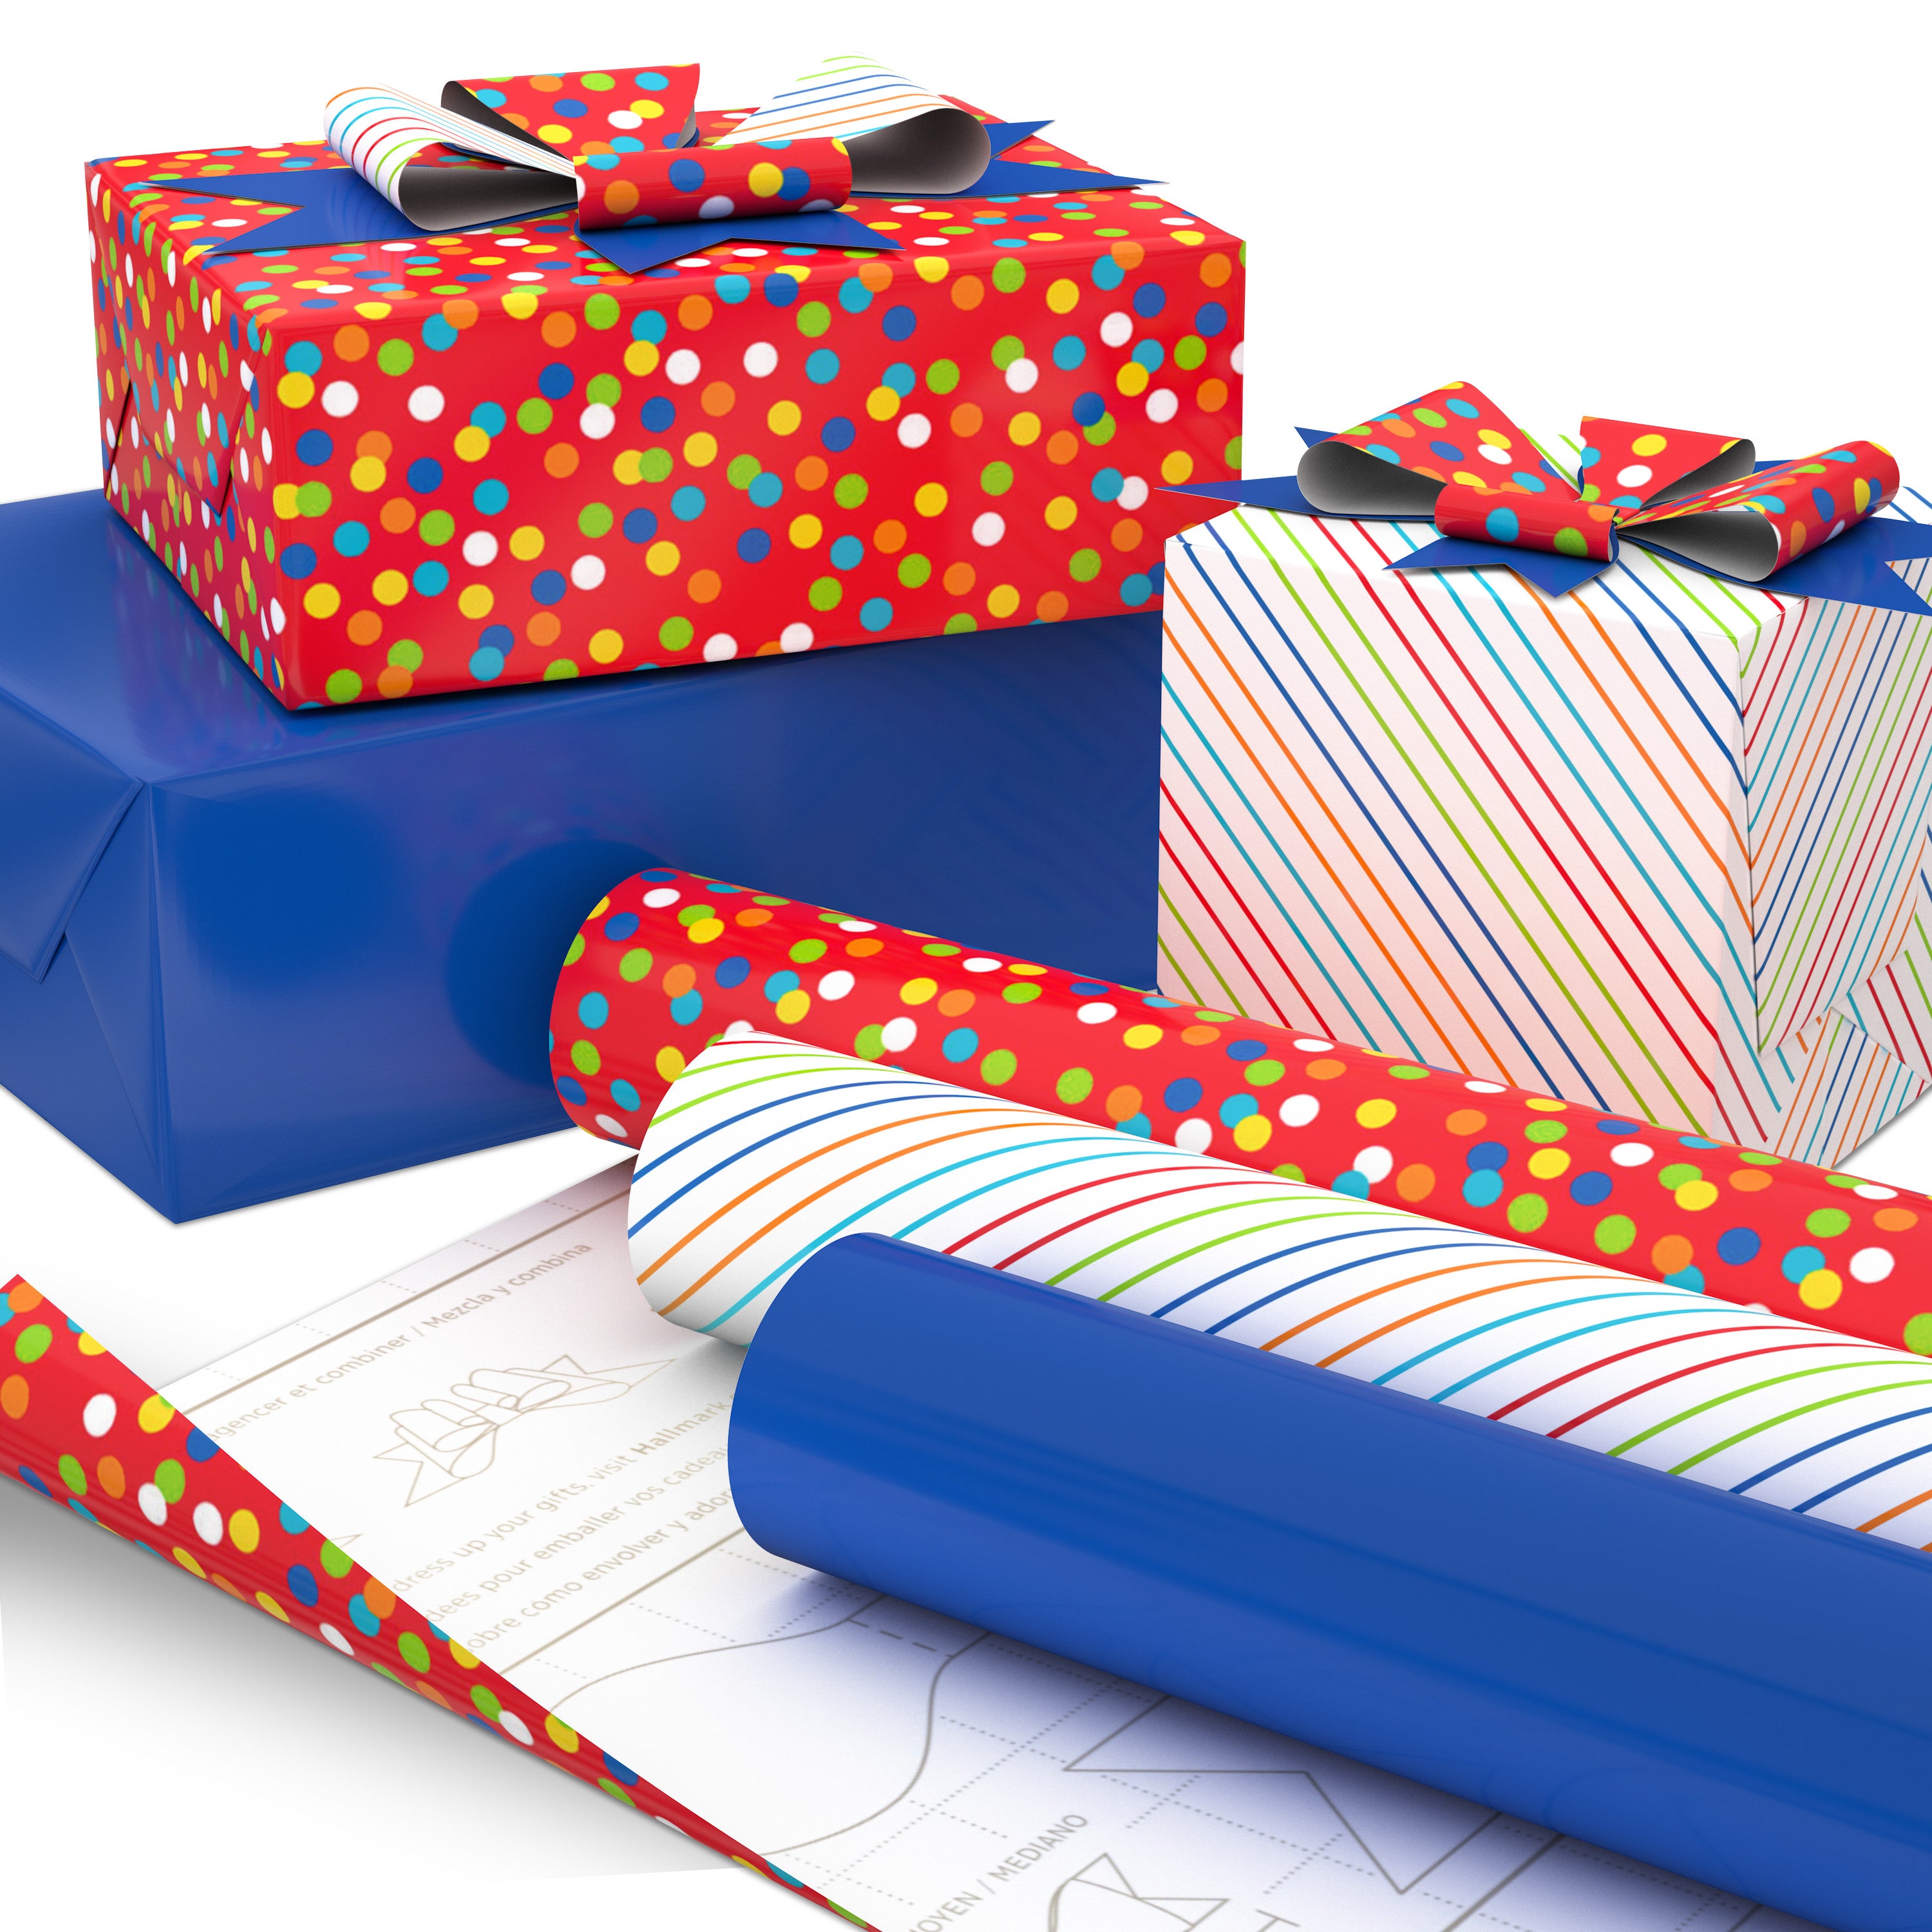 Hallmark Birthday Wrapping Paper with Templates for Handmade Bows on Reverse (3-Pack: 75 sq. ft. ttl) Royal Blue, Rainbow Stripes, Colorful Confetti